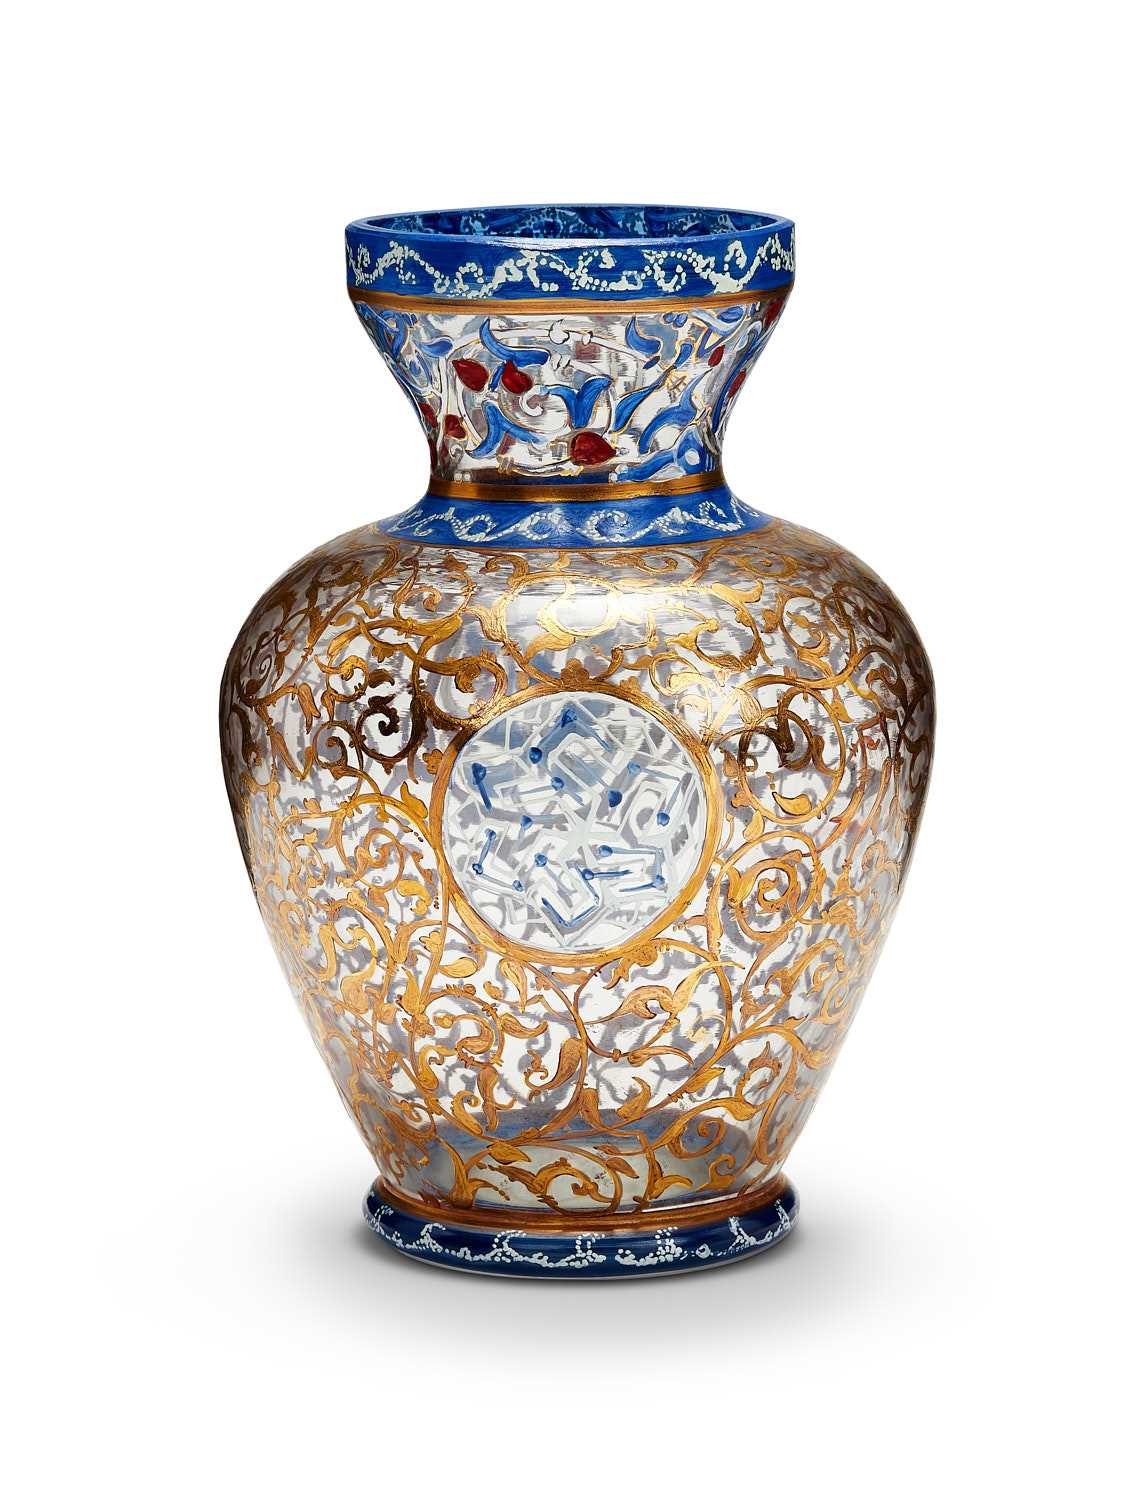 A PERSIAN STYLE PAINTED AND GILT DECORATED GLASS VASE